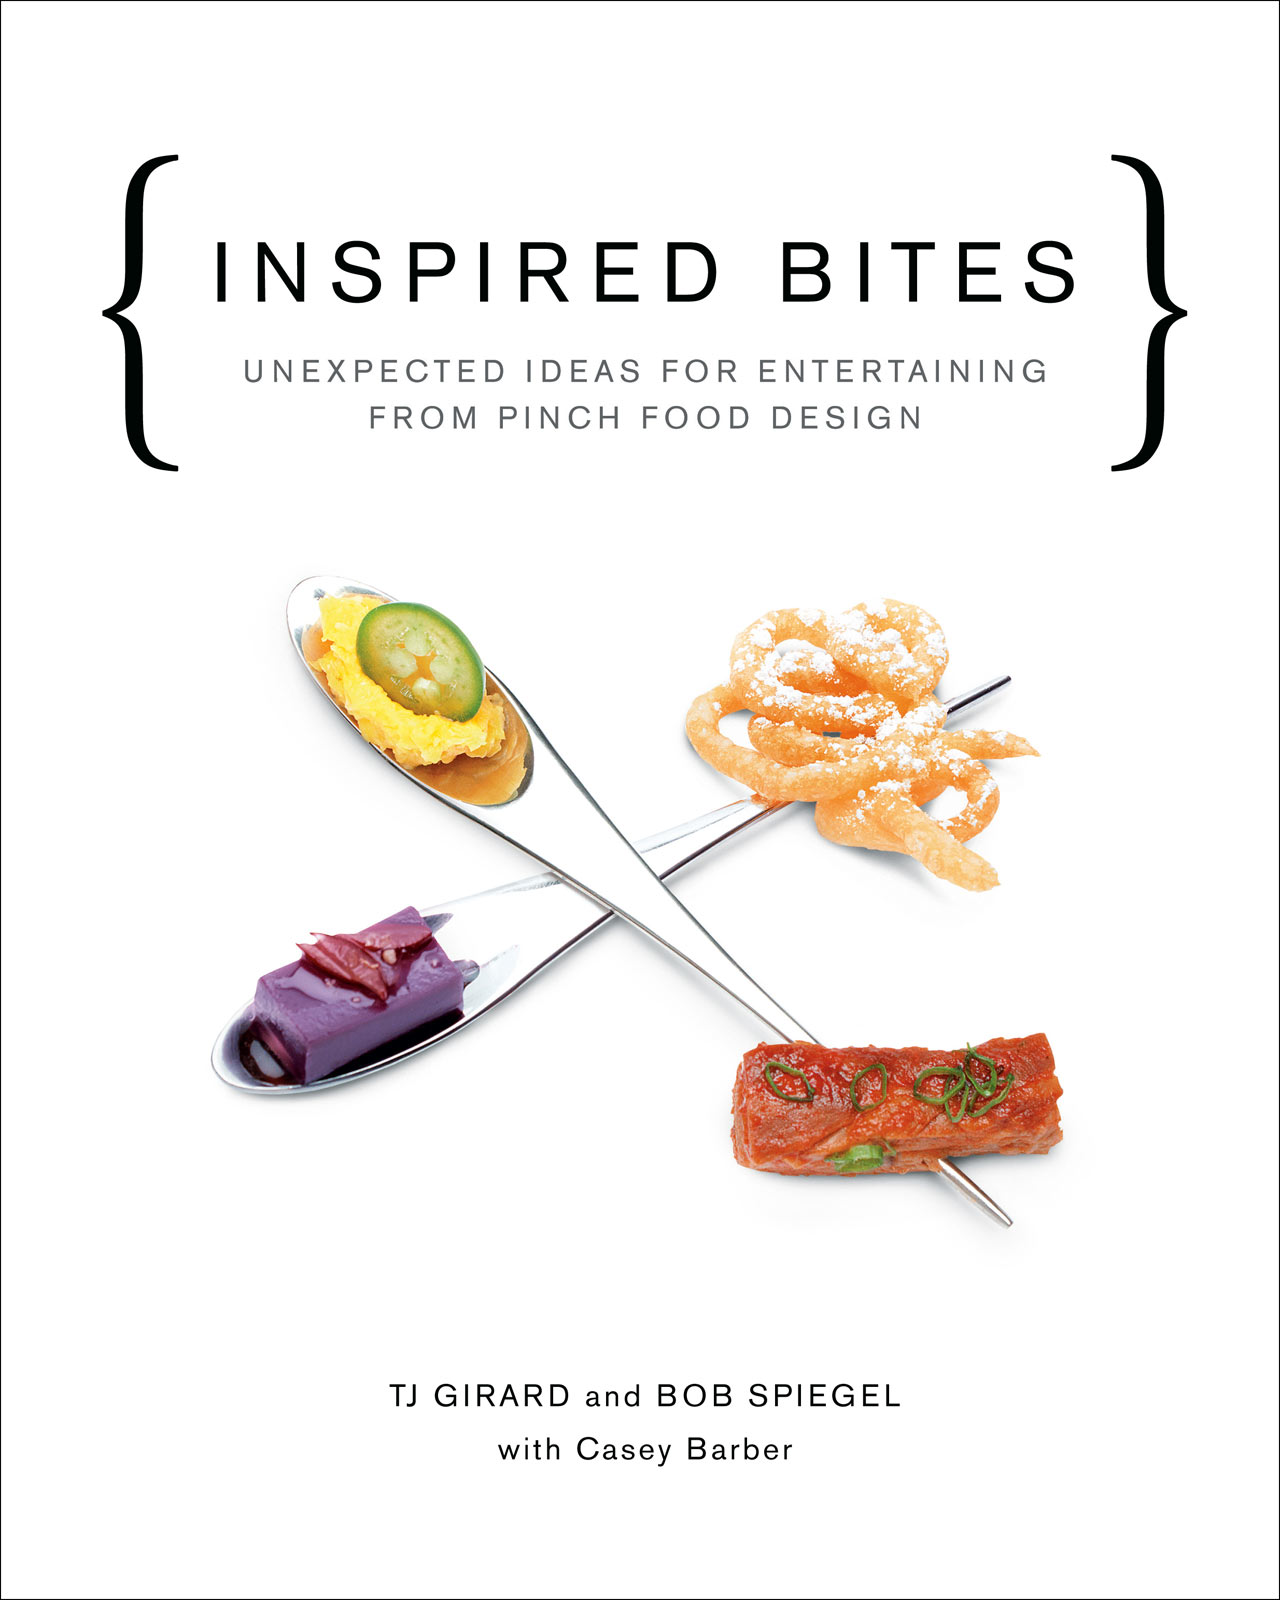 Inspiration You Can Taste: Inspired Bites by Pinch Food Design